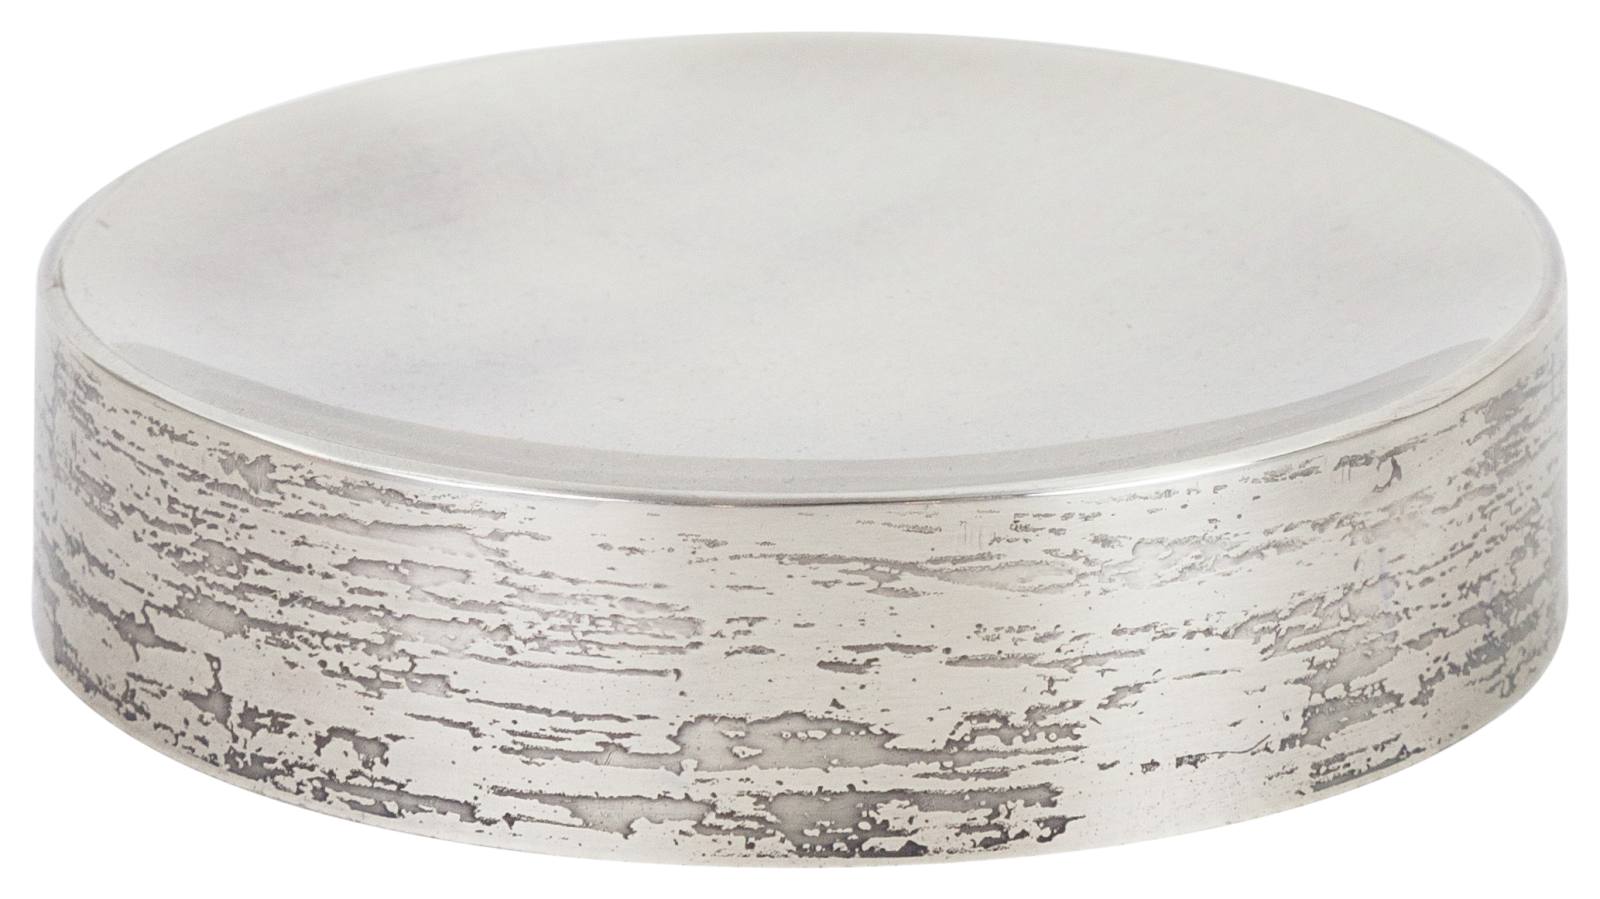 Alexa Stainless Steel Soap Dish, Antique Silver